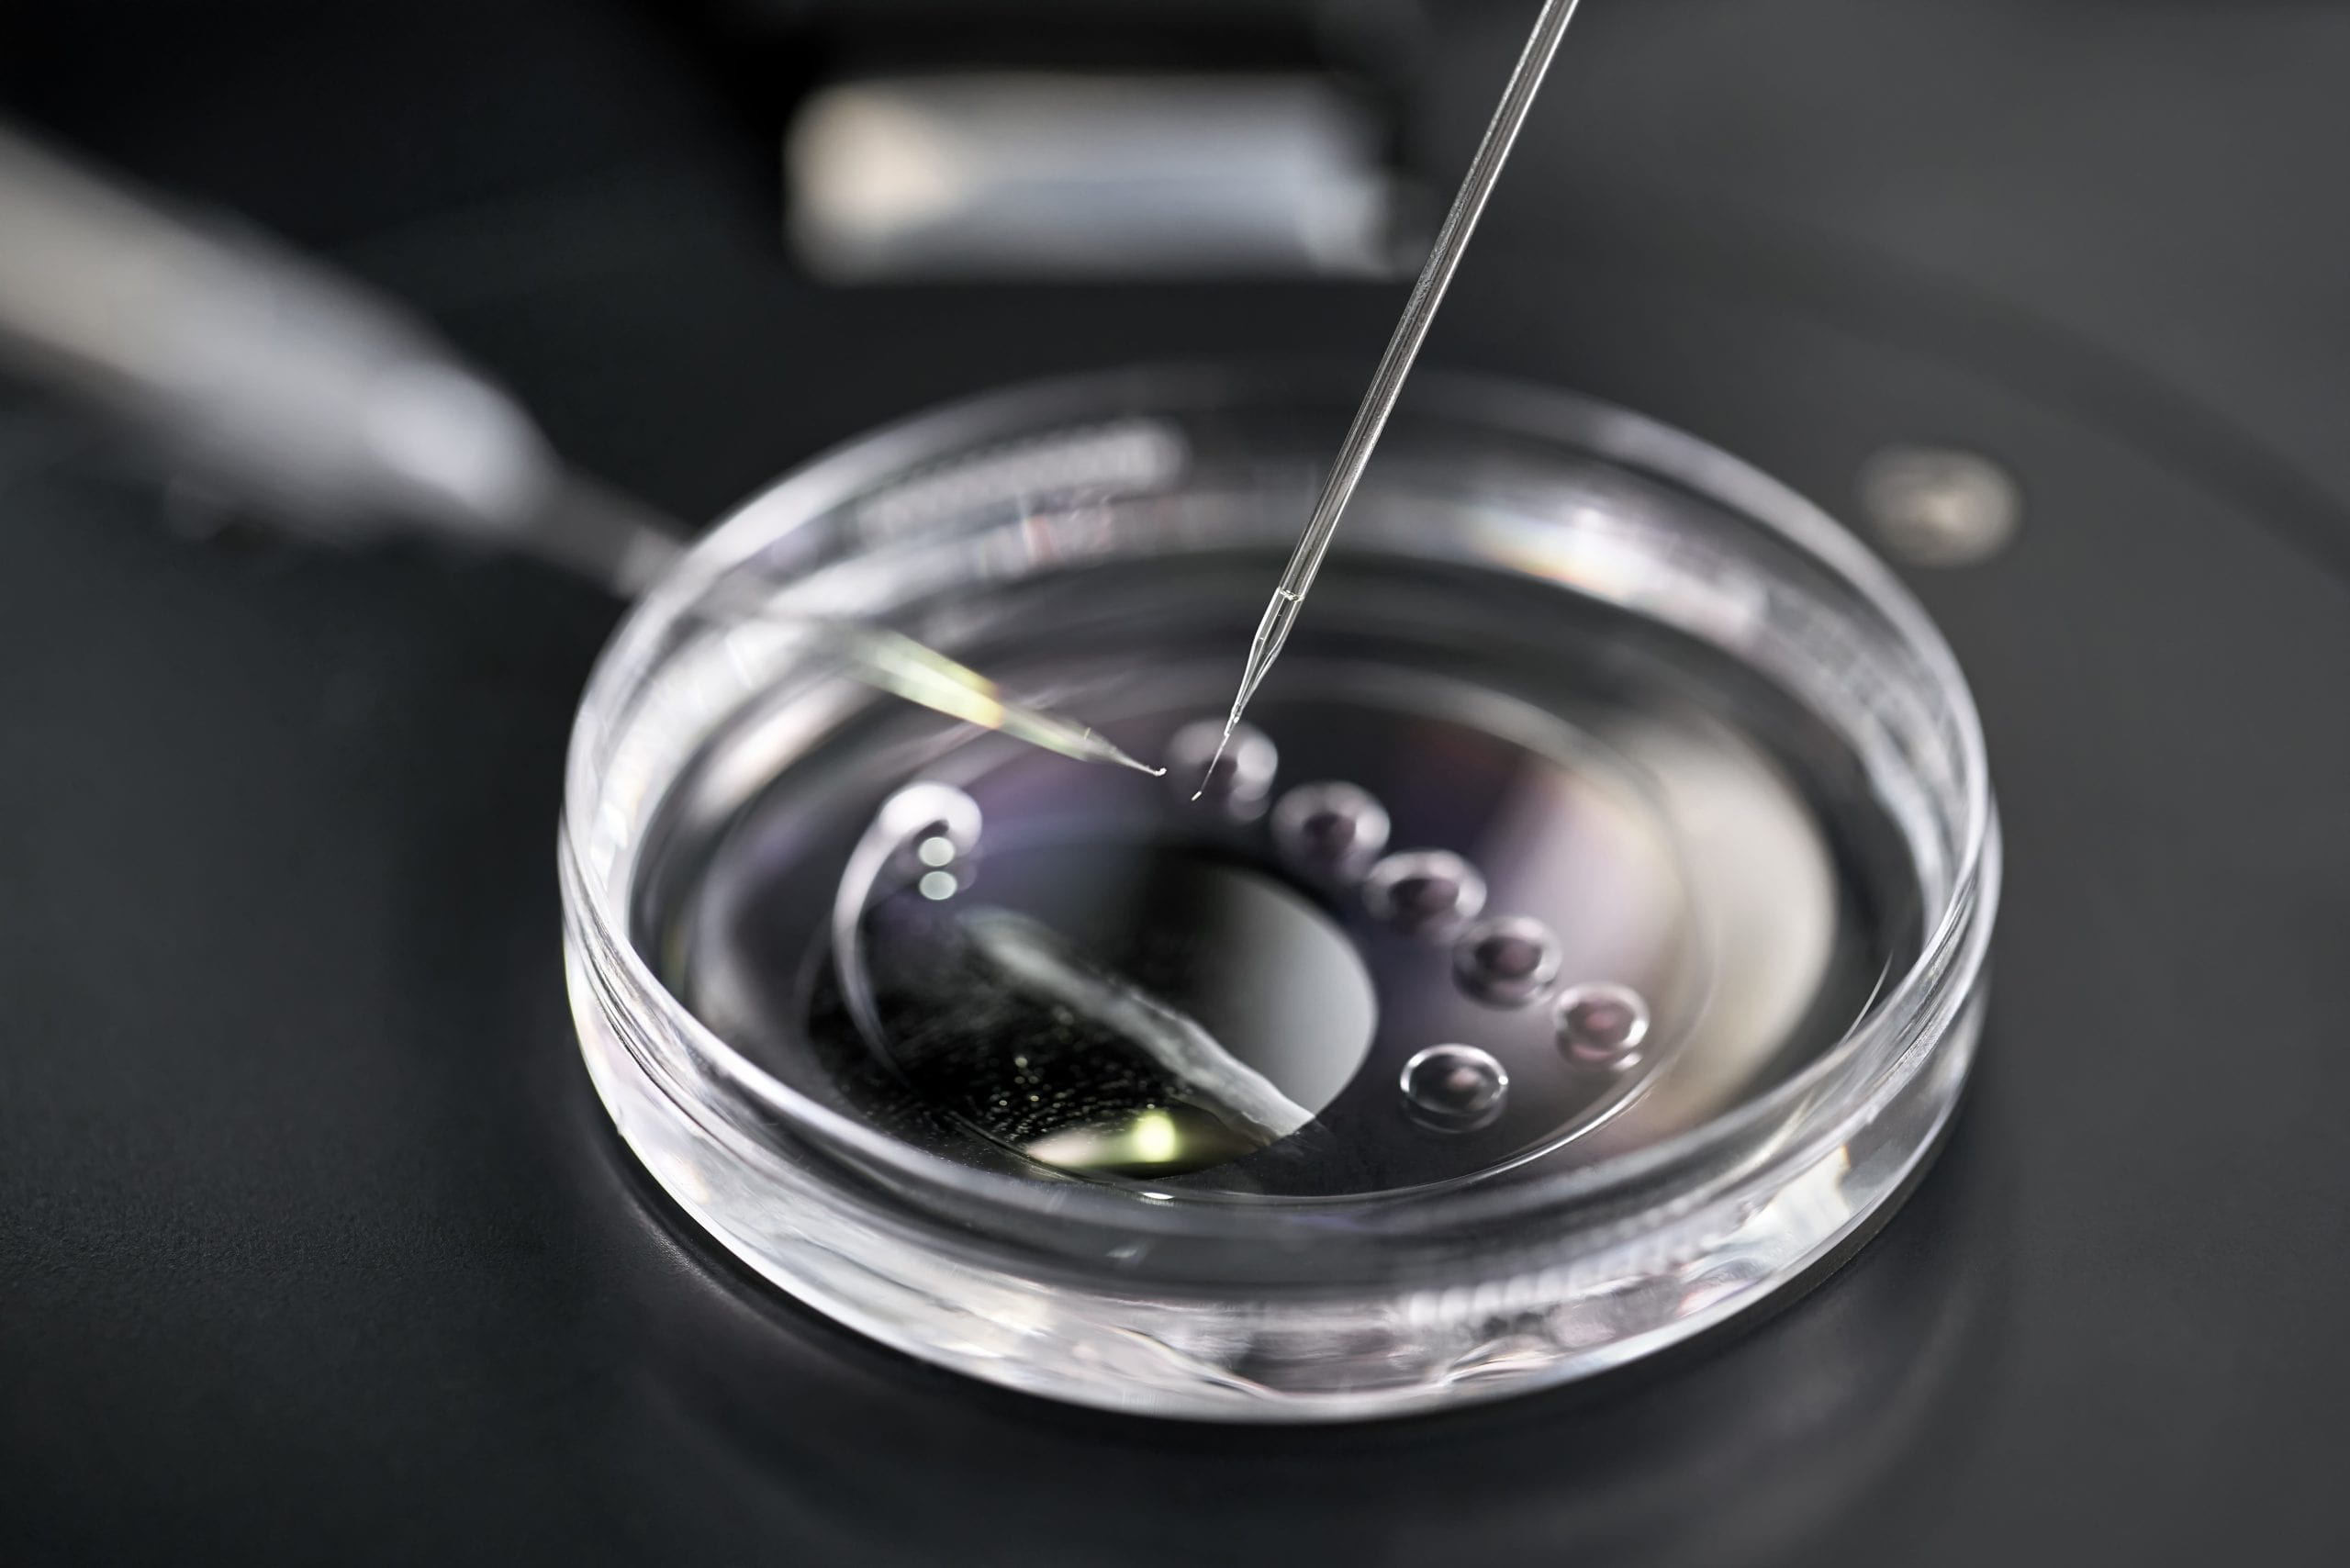 IVF donor sperm being placed into a petri dish.